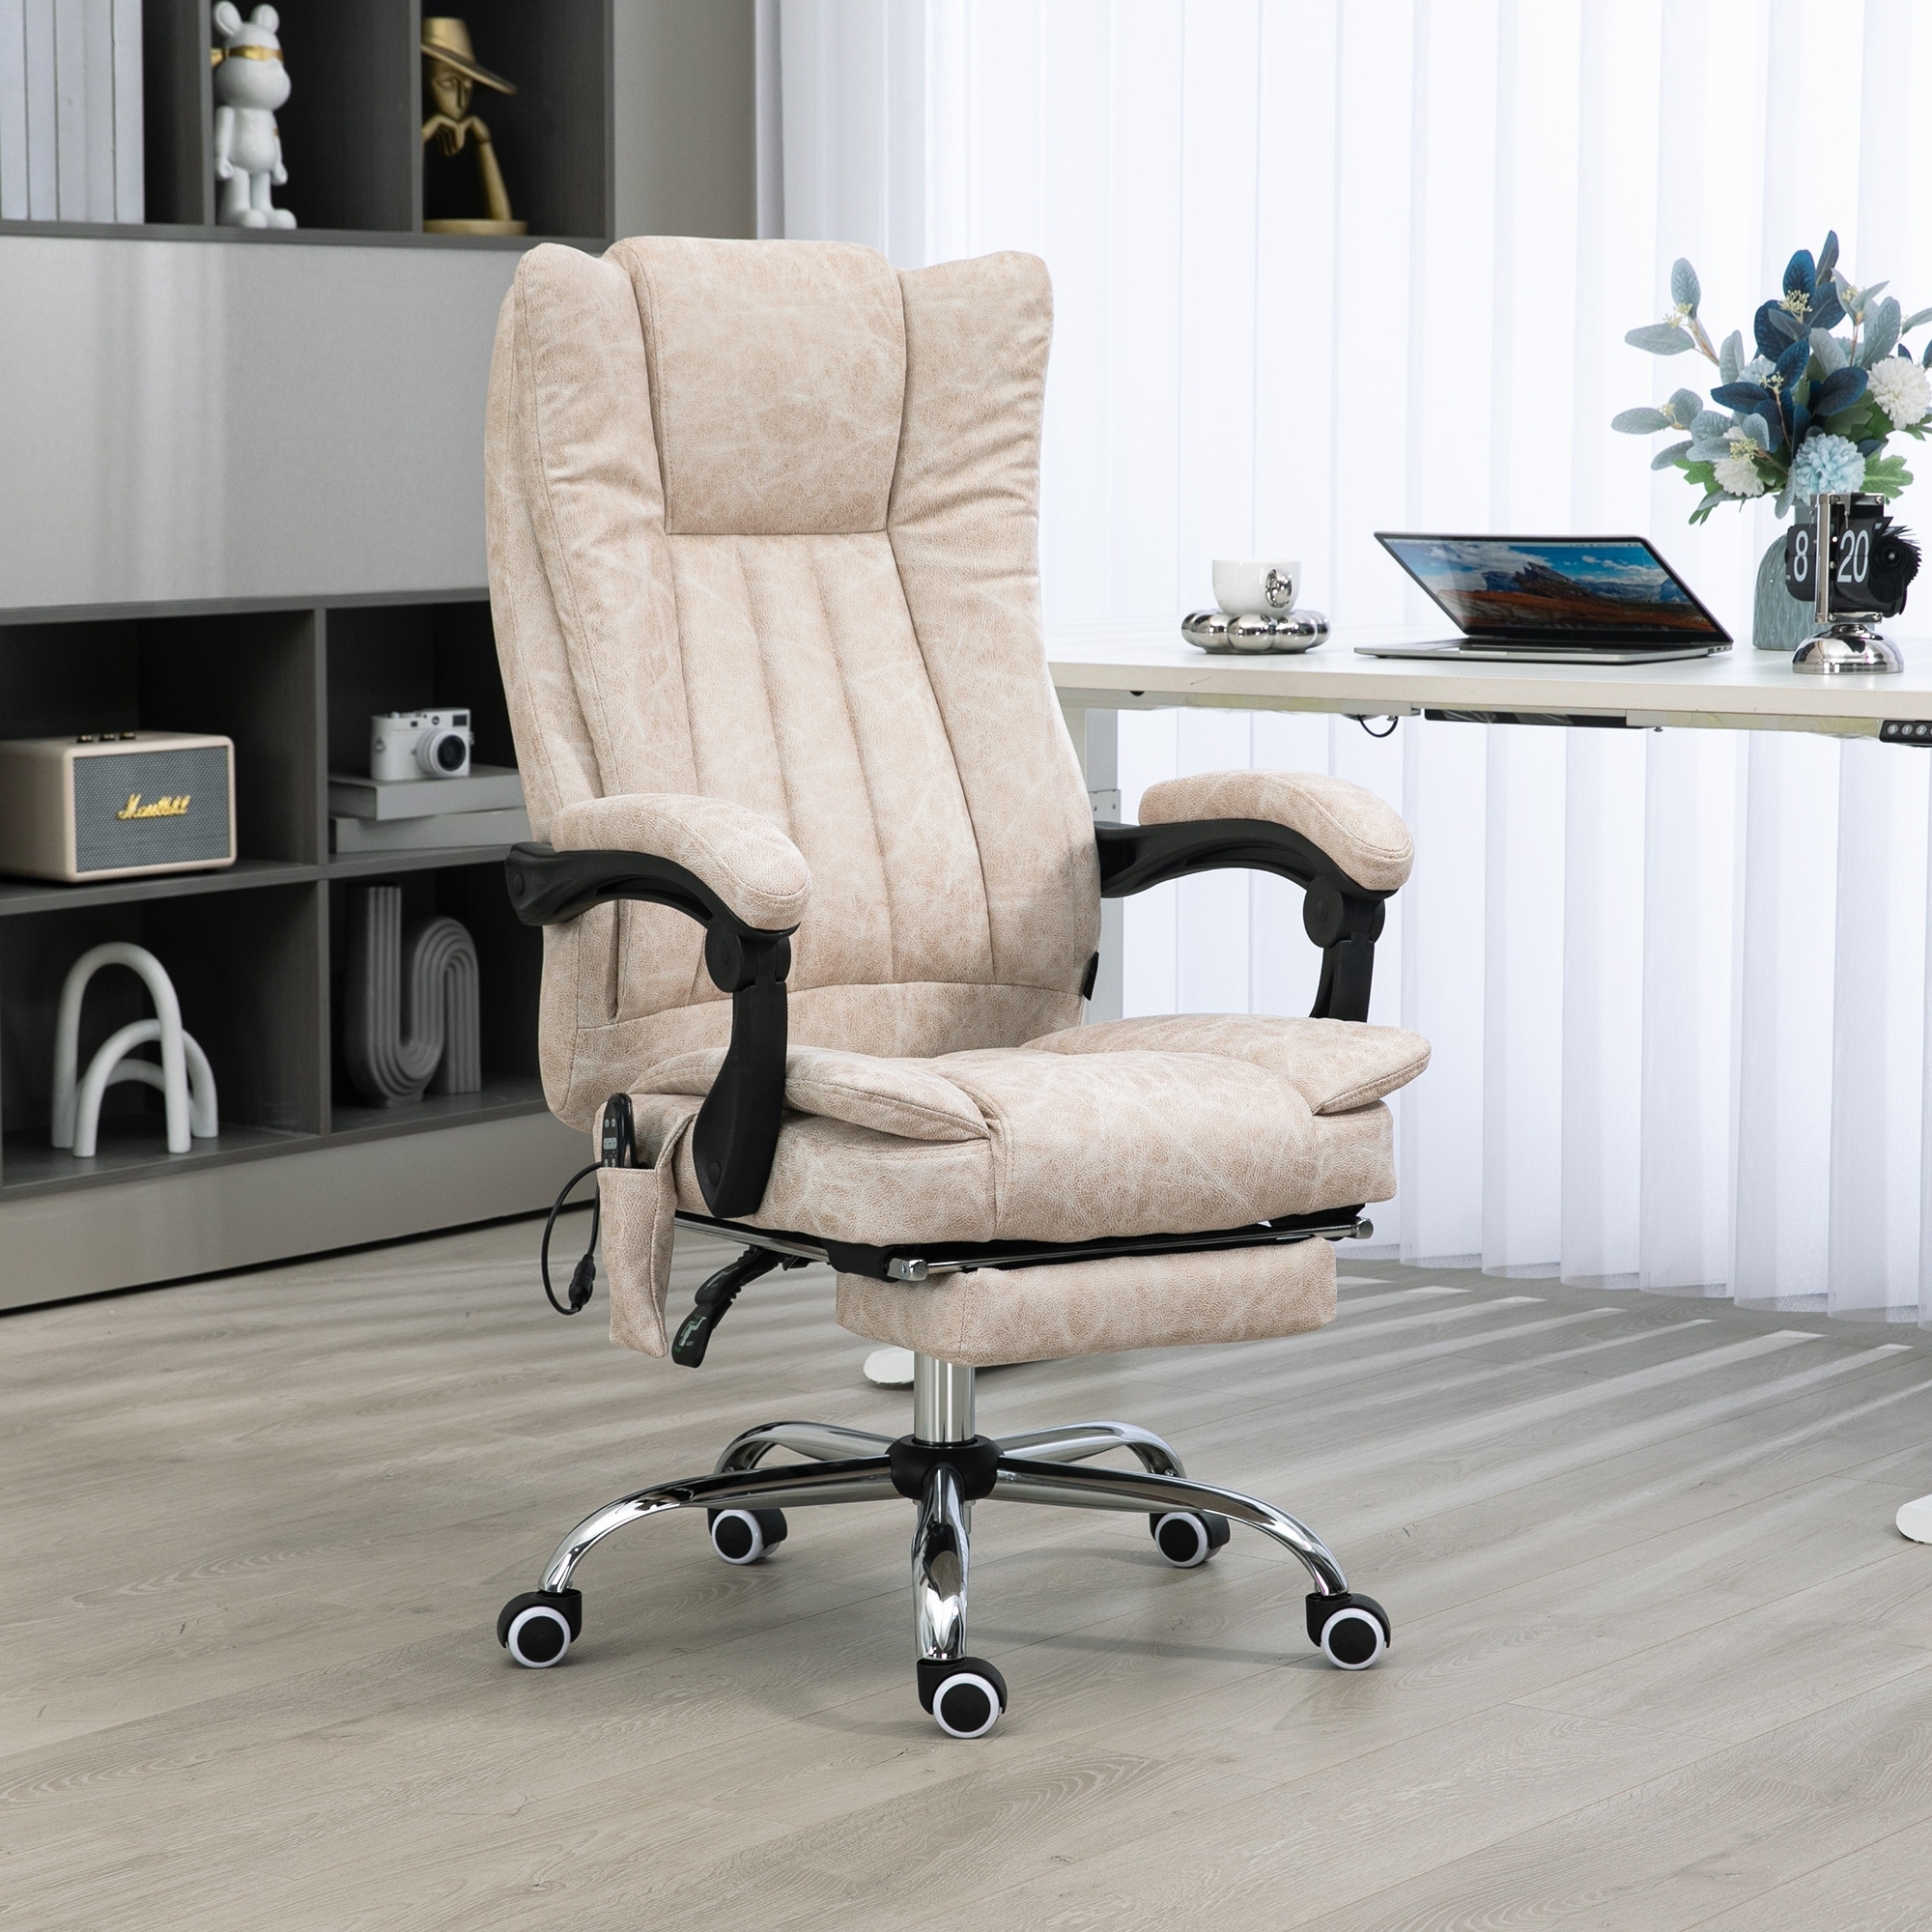 https://ak1.ostkcdn.com/images/products/is/images/direct/7af0735fef8f7e816df112f915627292d8e27d04/Vinsetto-Massage-Office-Chair-with-6-Points%2C-Heated-High-Back-Recliner-with-Adjustable-Height%2C-Swivel-Wheels.jpg